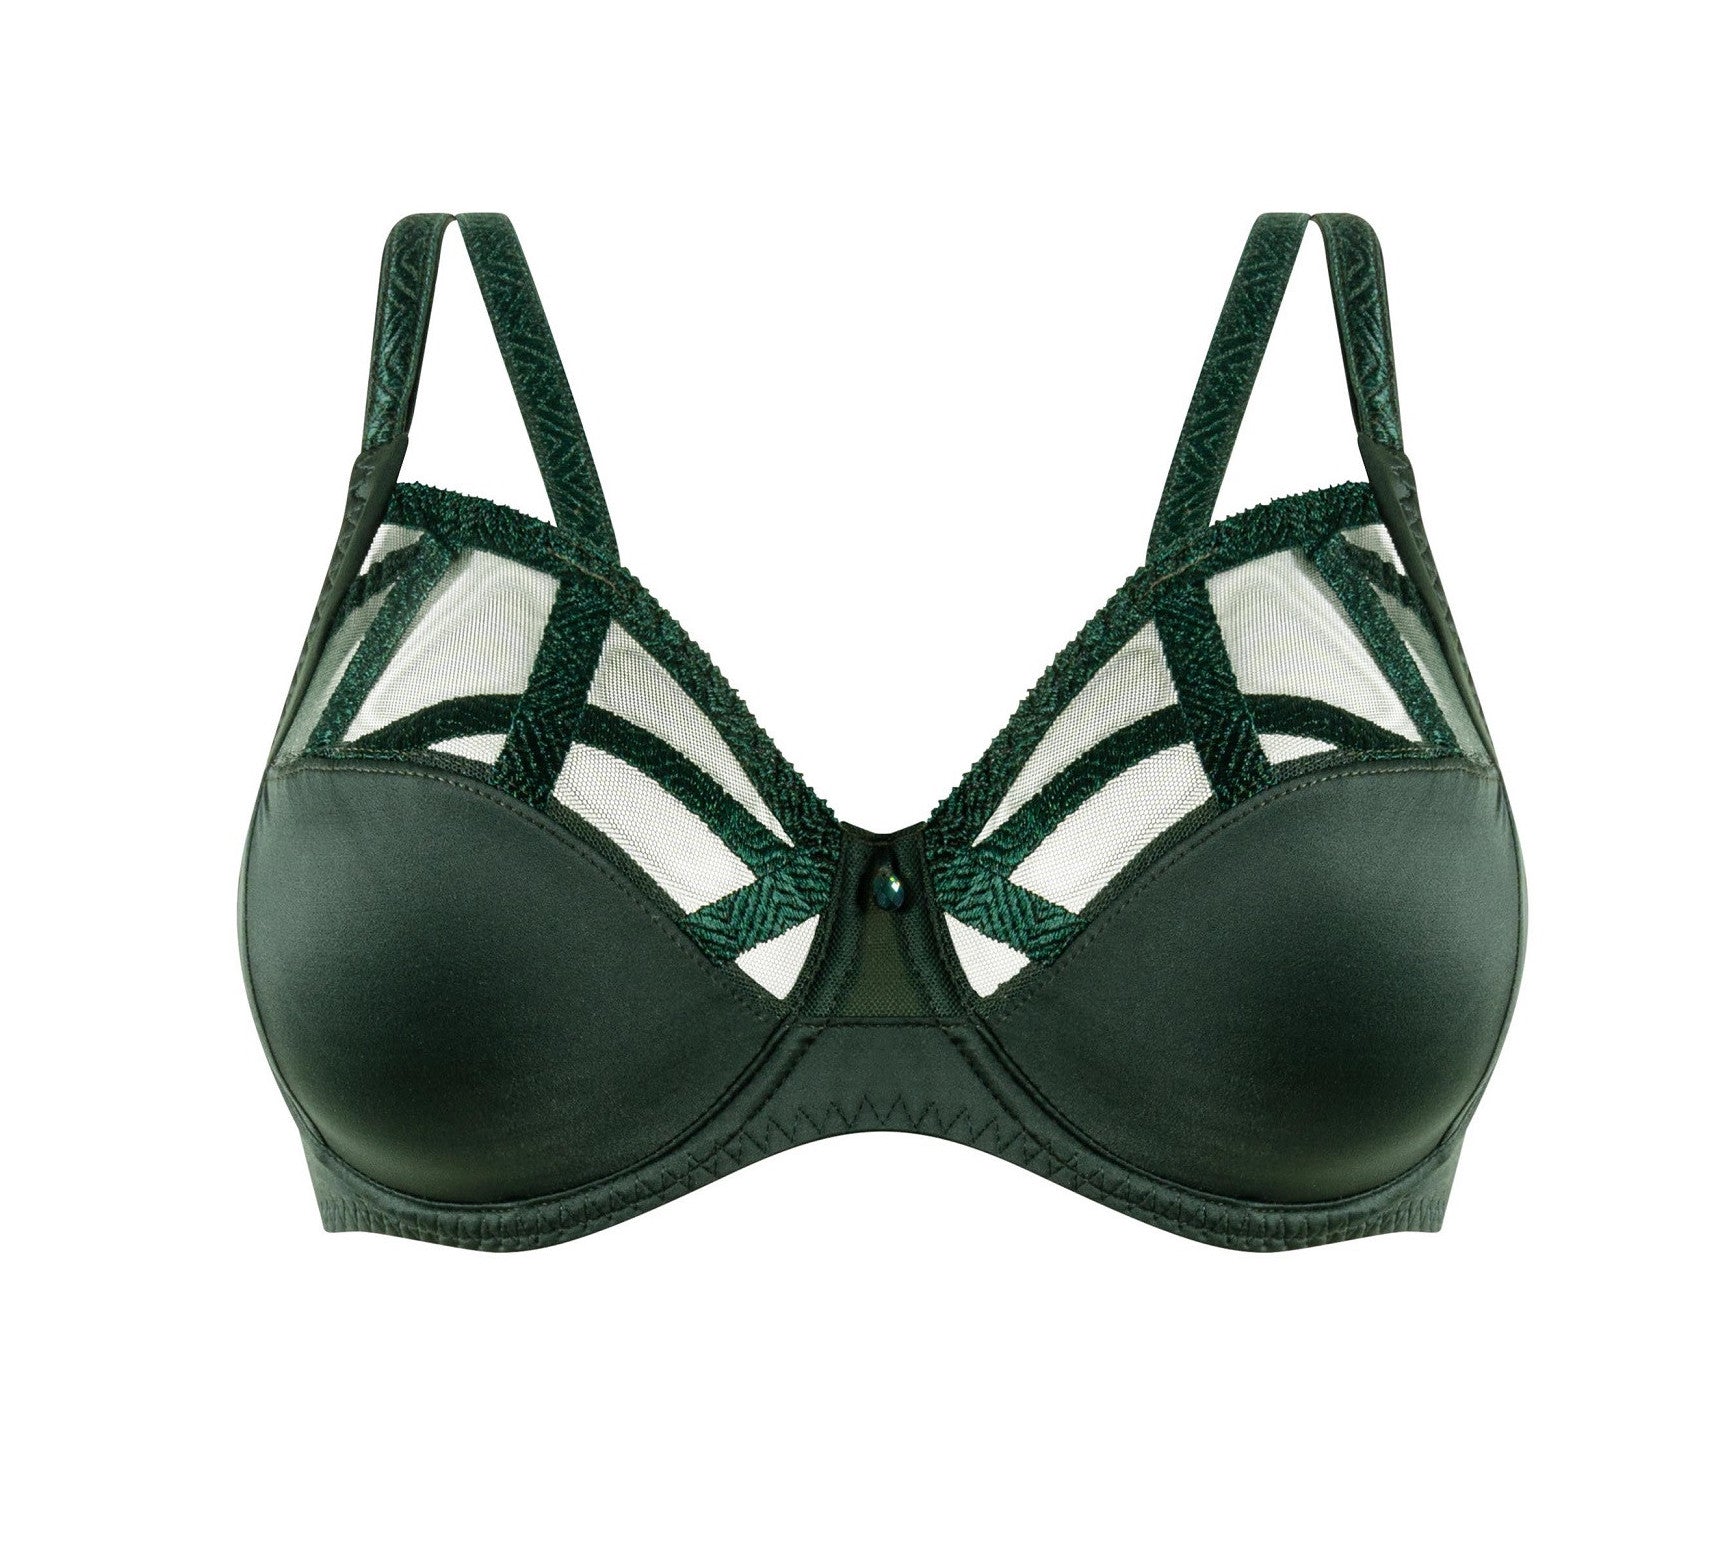 30H Bras and Lingerie, 30H Bra Size